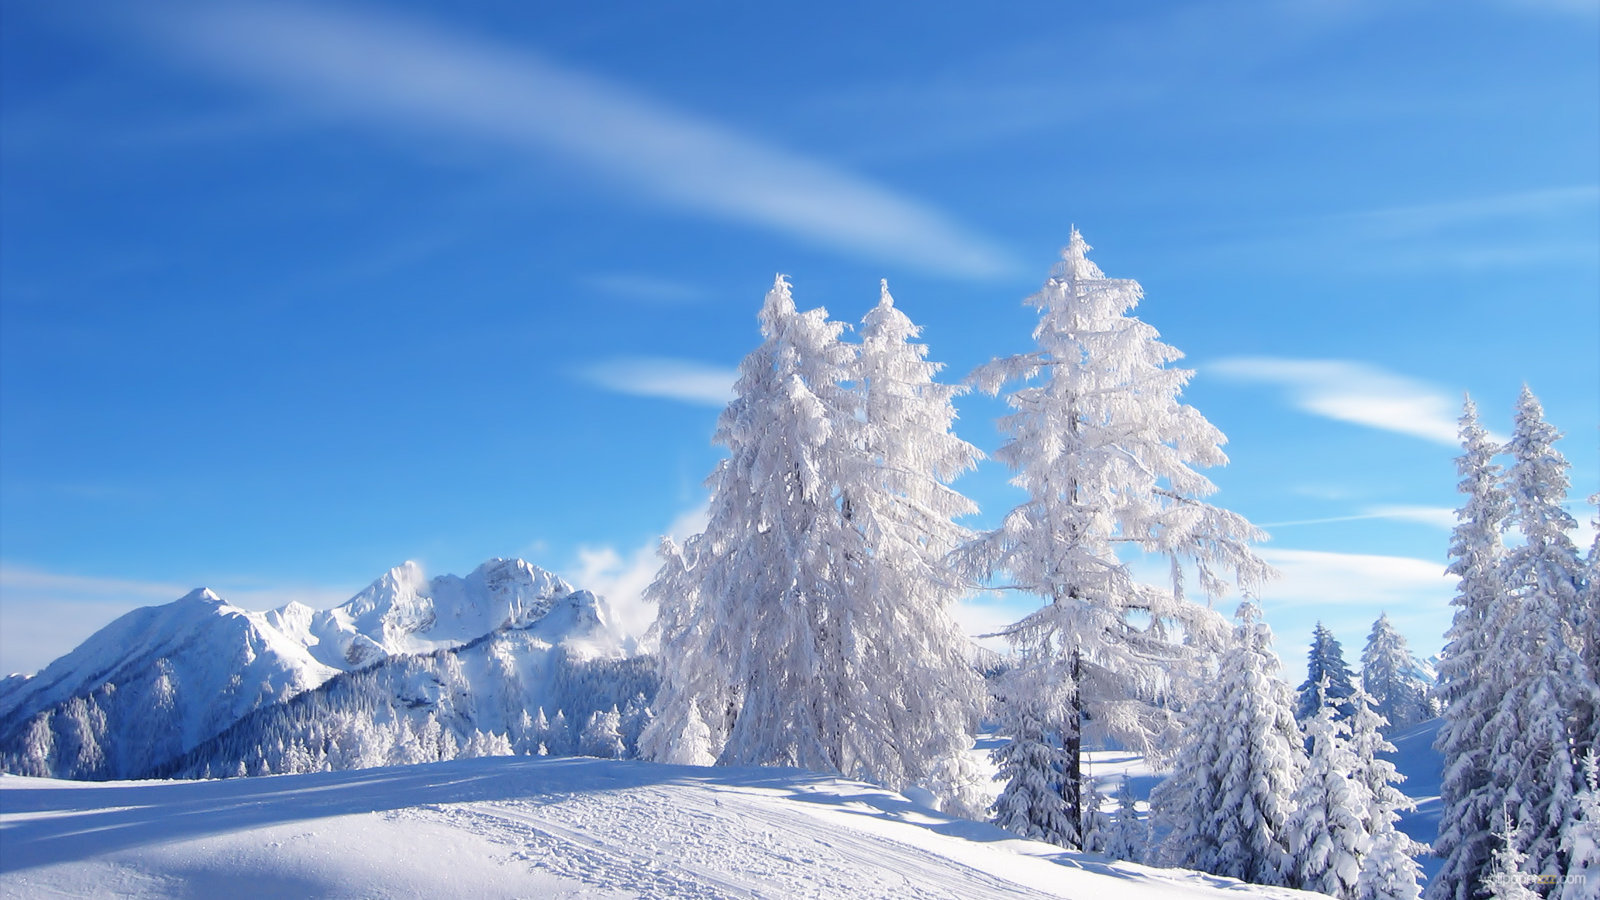 Download Winter In The Mountains Widescreen WallpaperFree Wallpaper